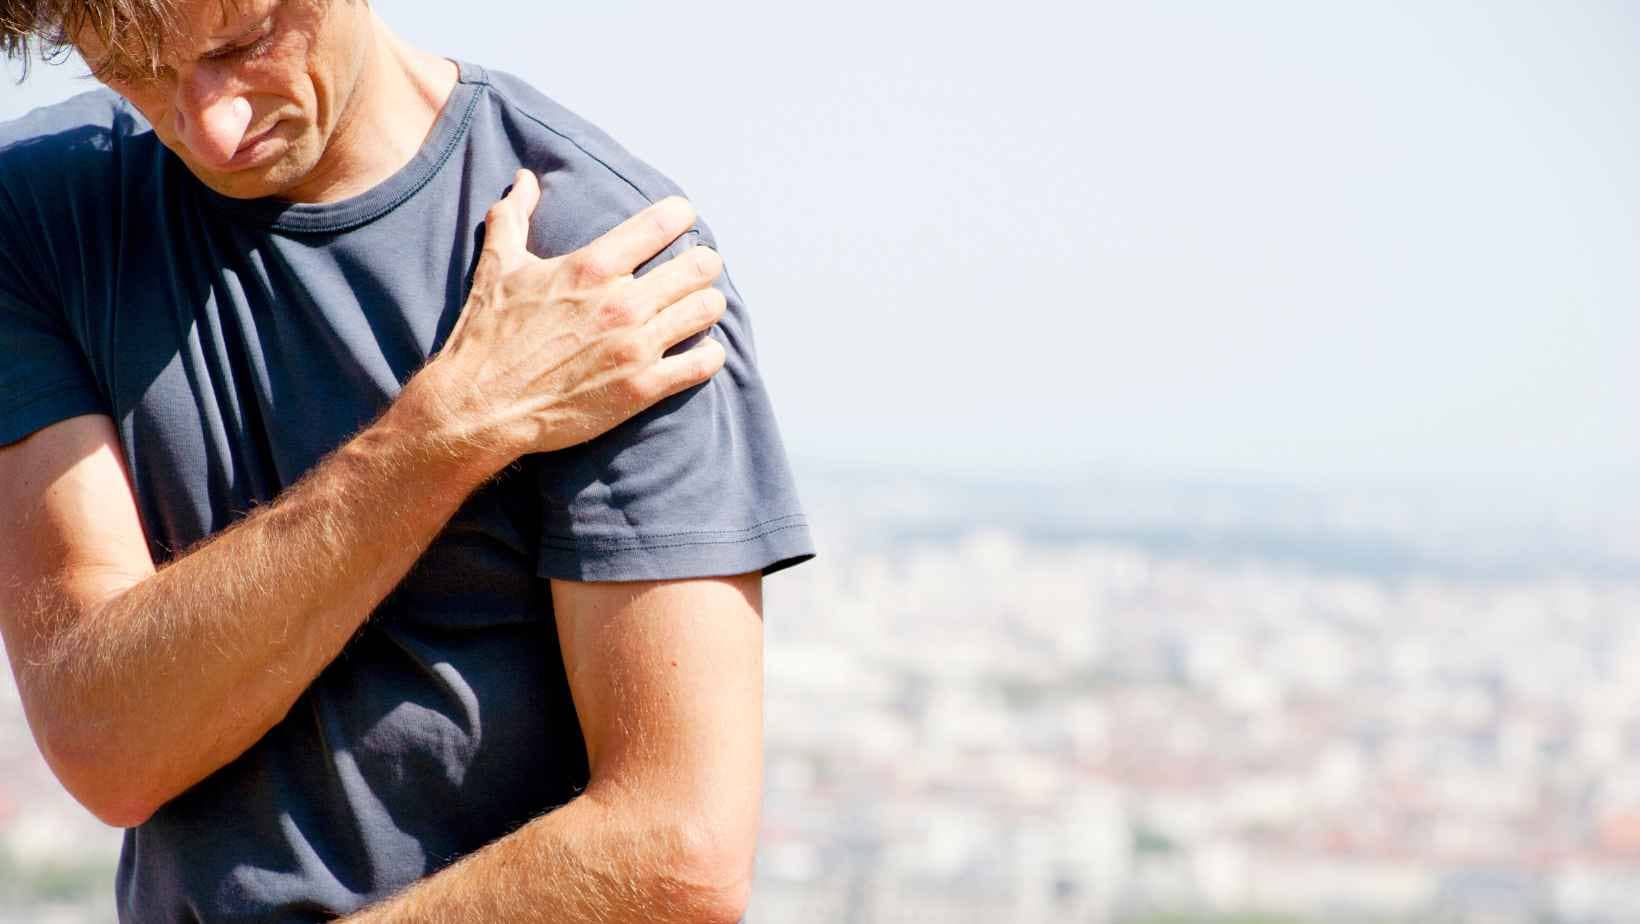 How Can I Tell Whether My Shoulder Pain Is Severe?